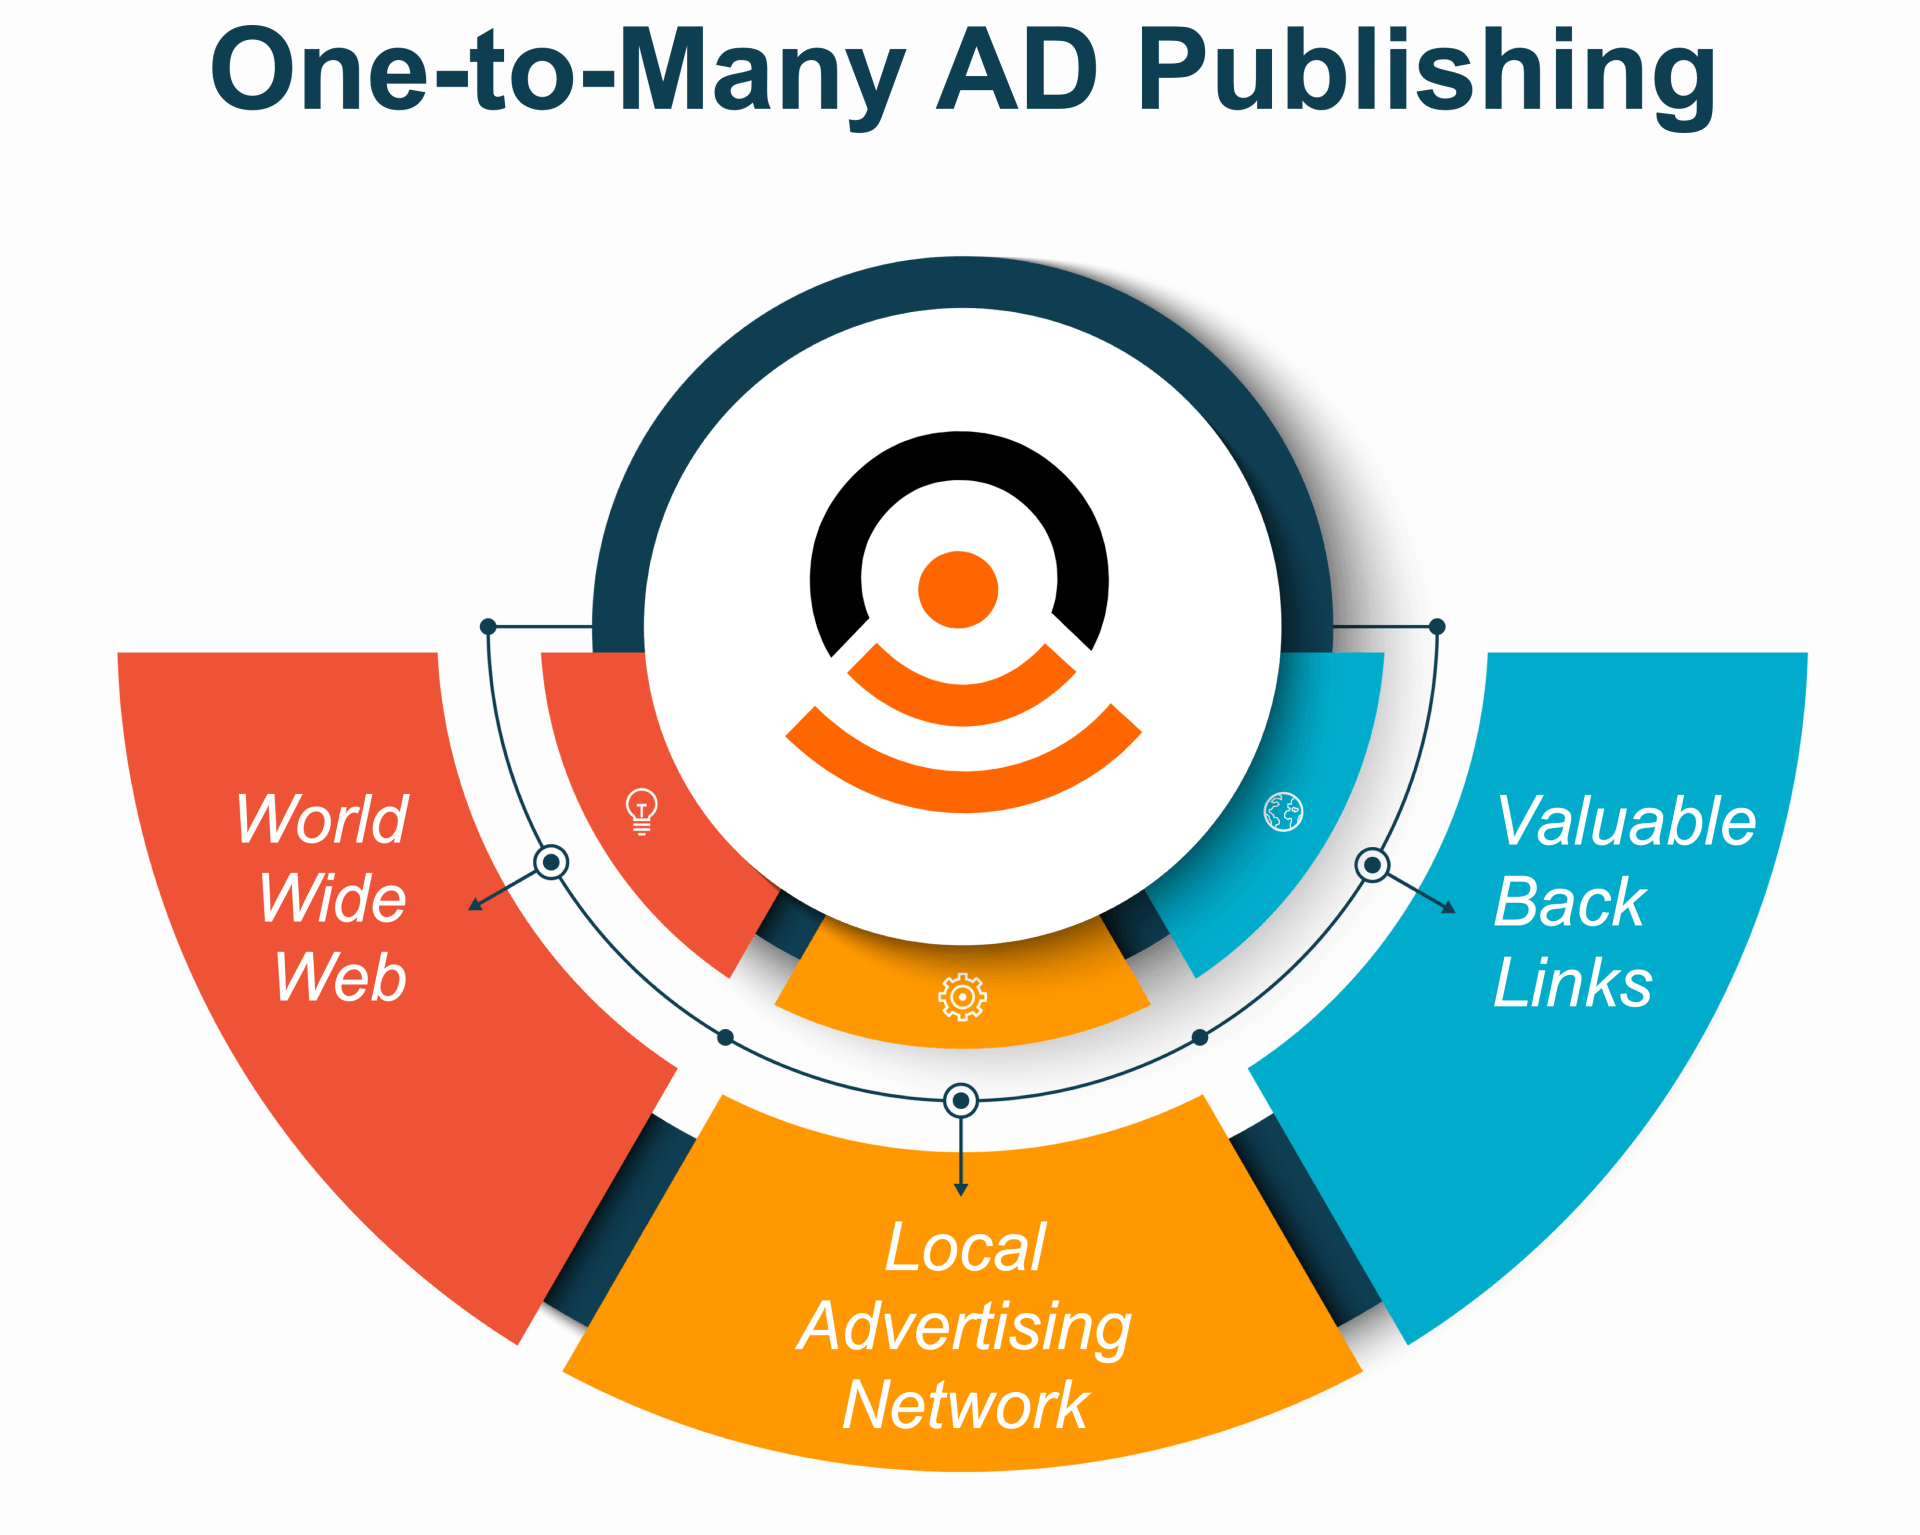 a diagram of a one-to-many ad publishing system